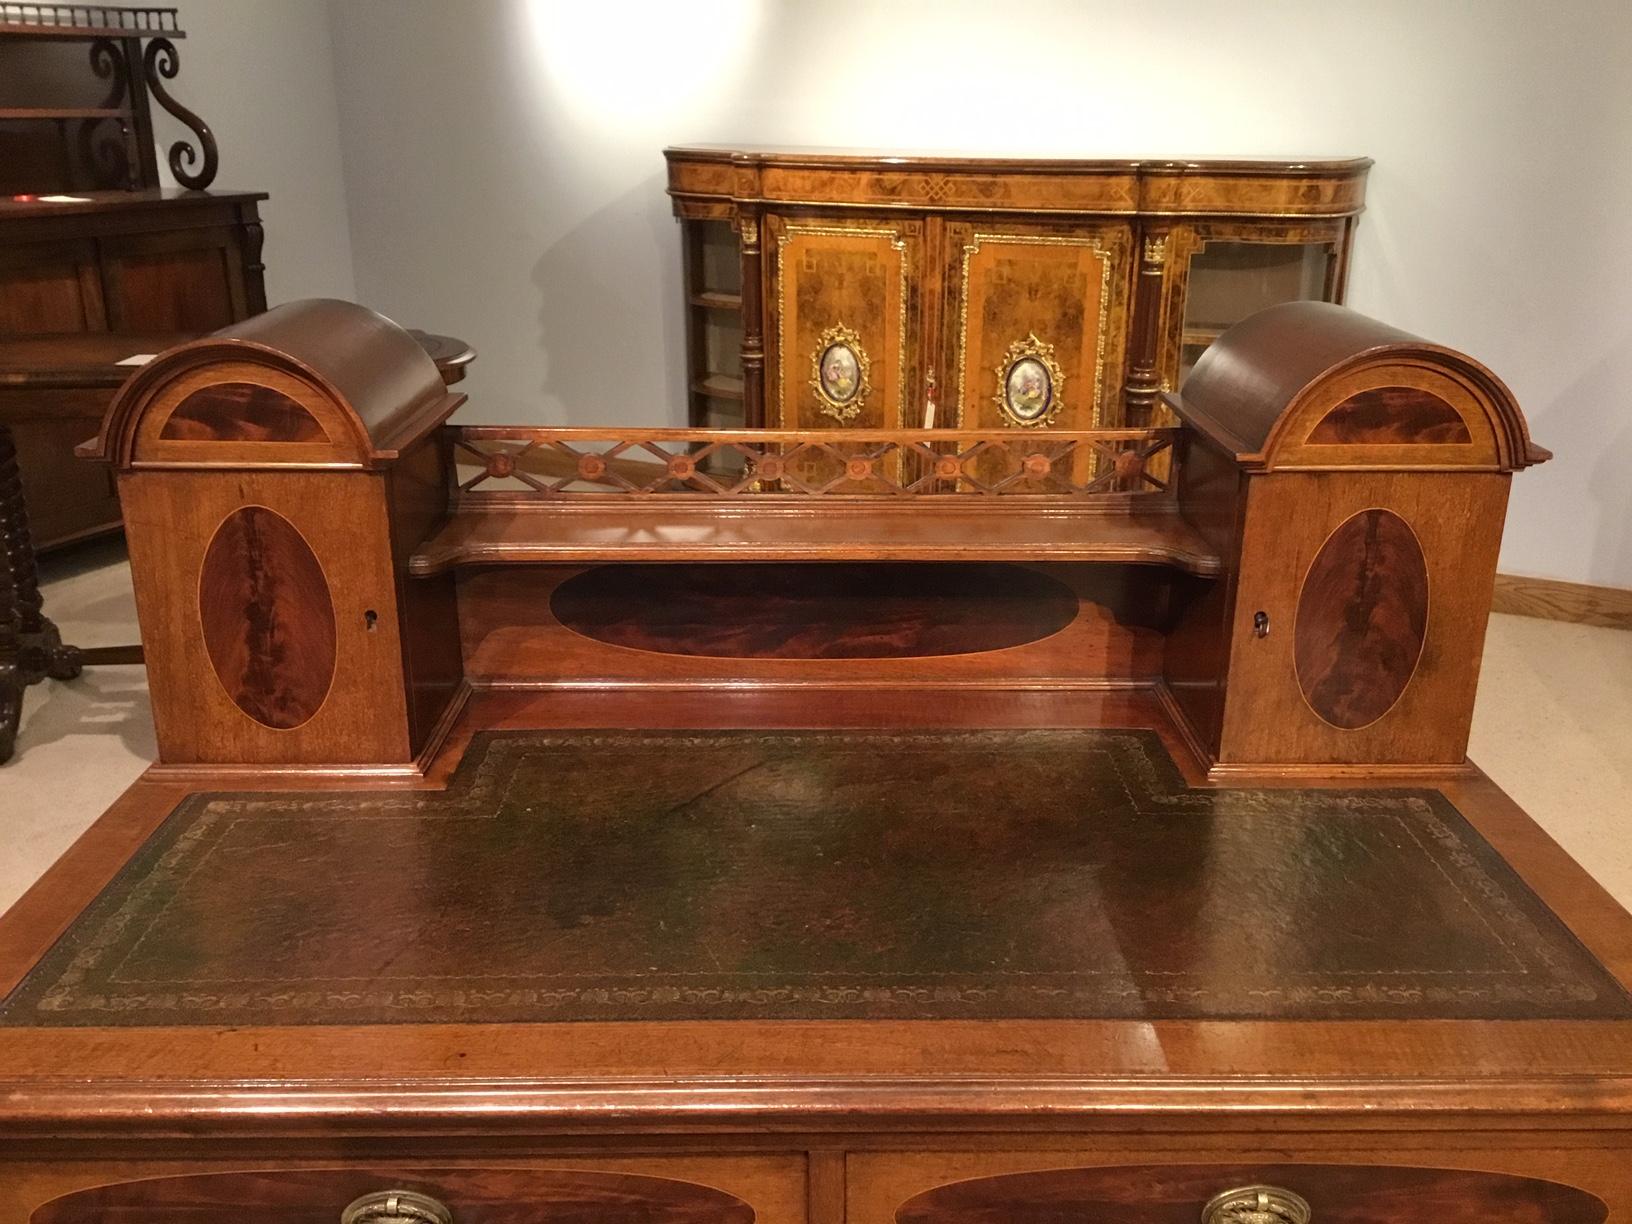 A mahogany inlaid Edwardian period ladies writing table. The upper section having a fretwork gallery, shaped shelf and domed end cabinets, enclosing letter racks, pen trays and ink well compartments. The lower section with a green leather writing